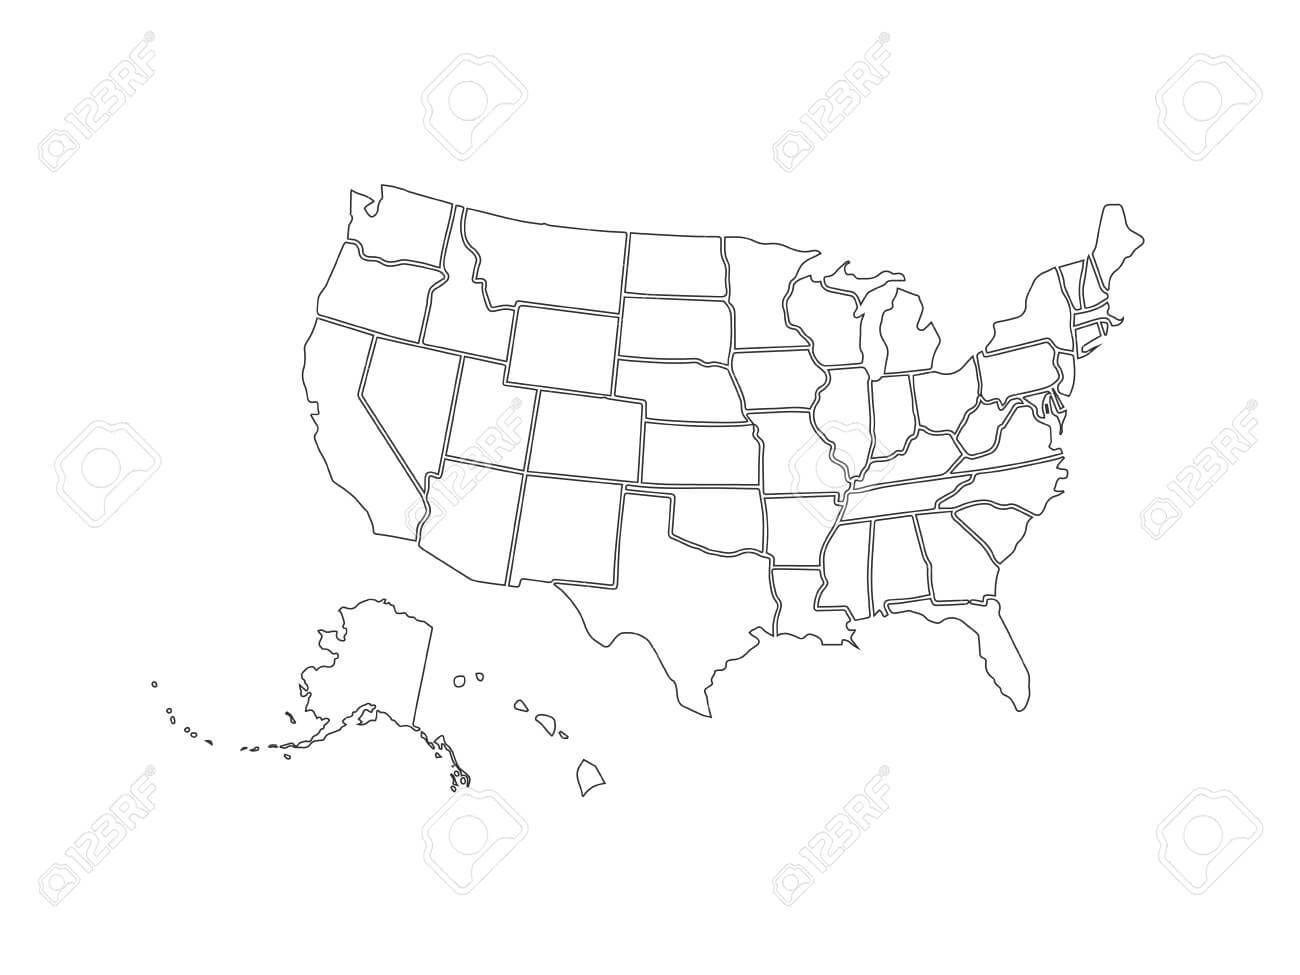 Blank Similar Usa Map Isolated On White Background. United States.. With Blank Template Of The United States